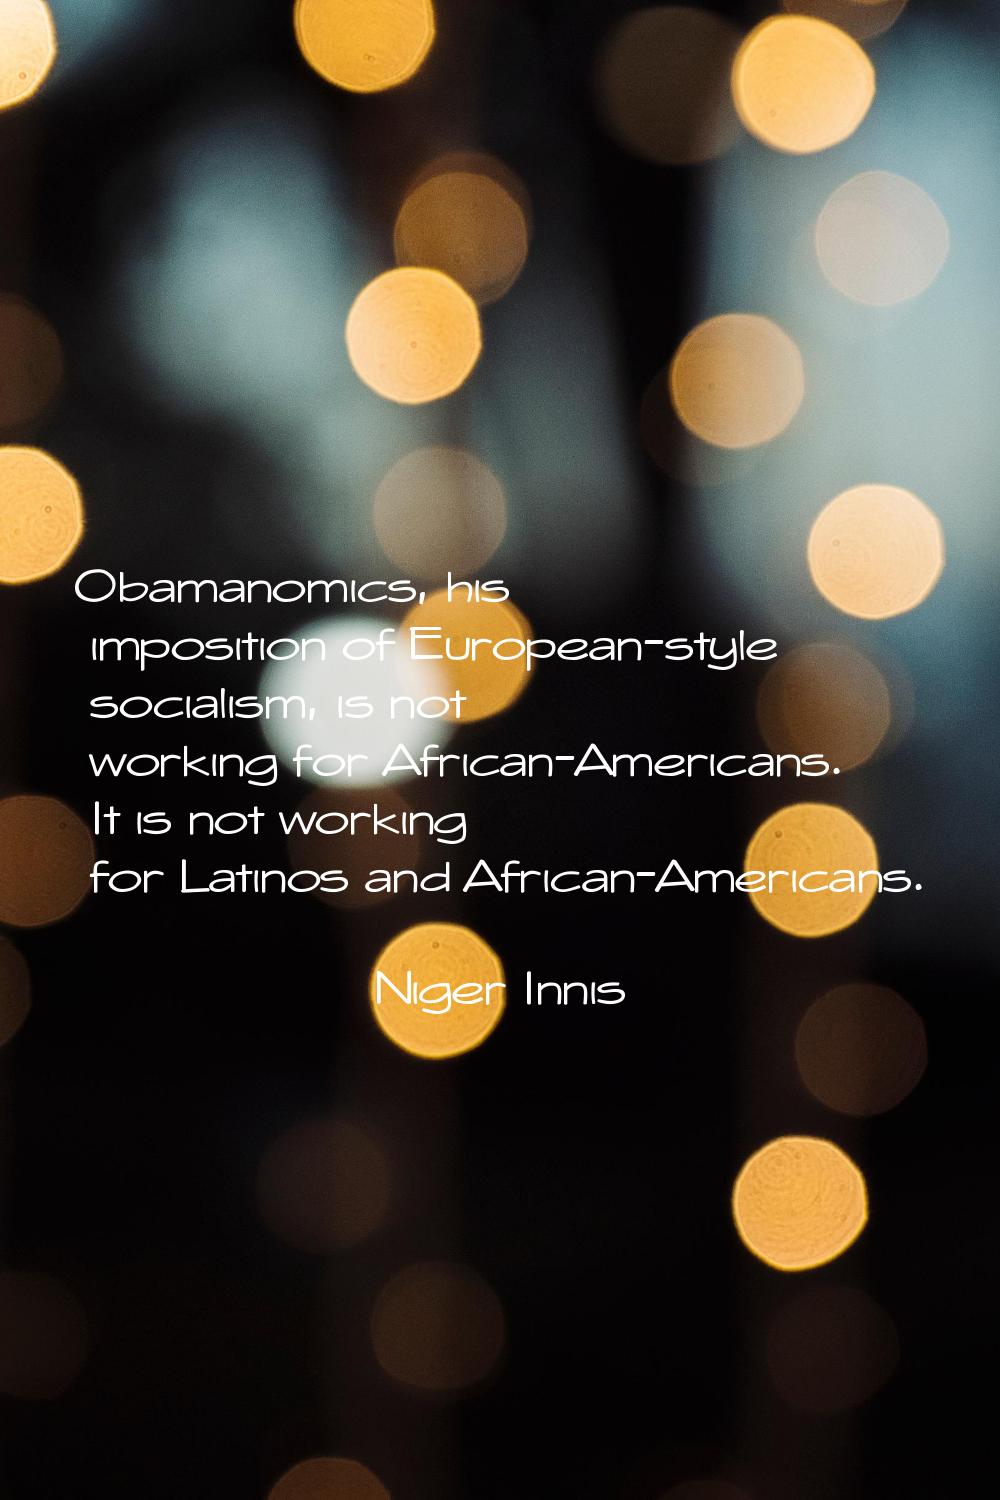 Obamanomics, his imposition of European-style socialism, is not working for African-Americans. It i